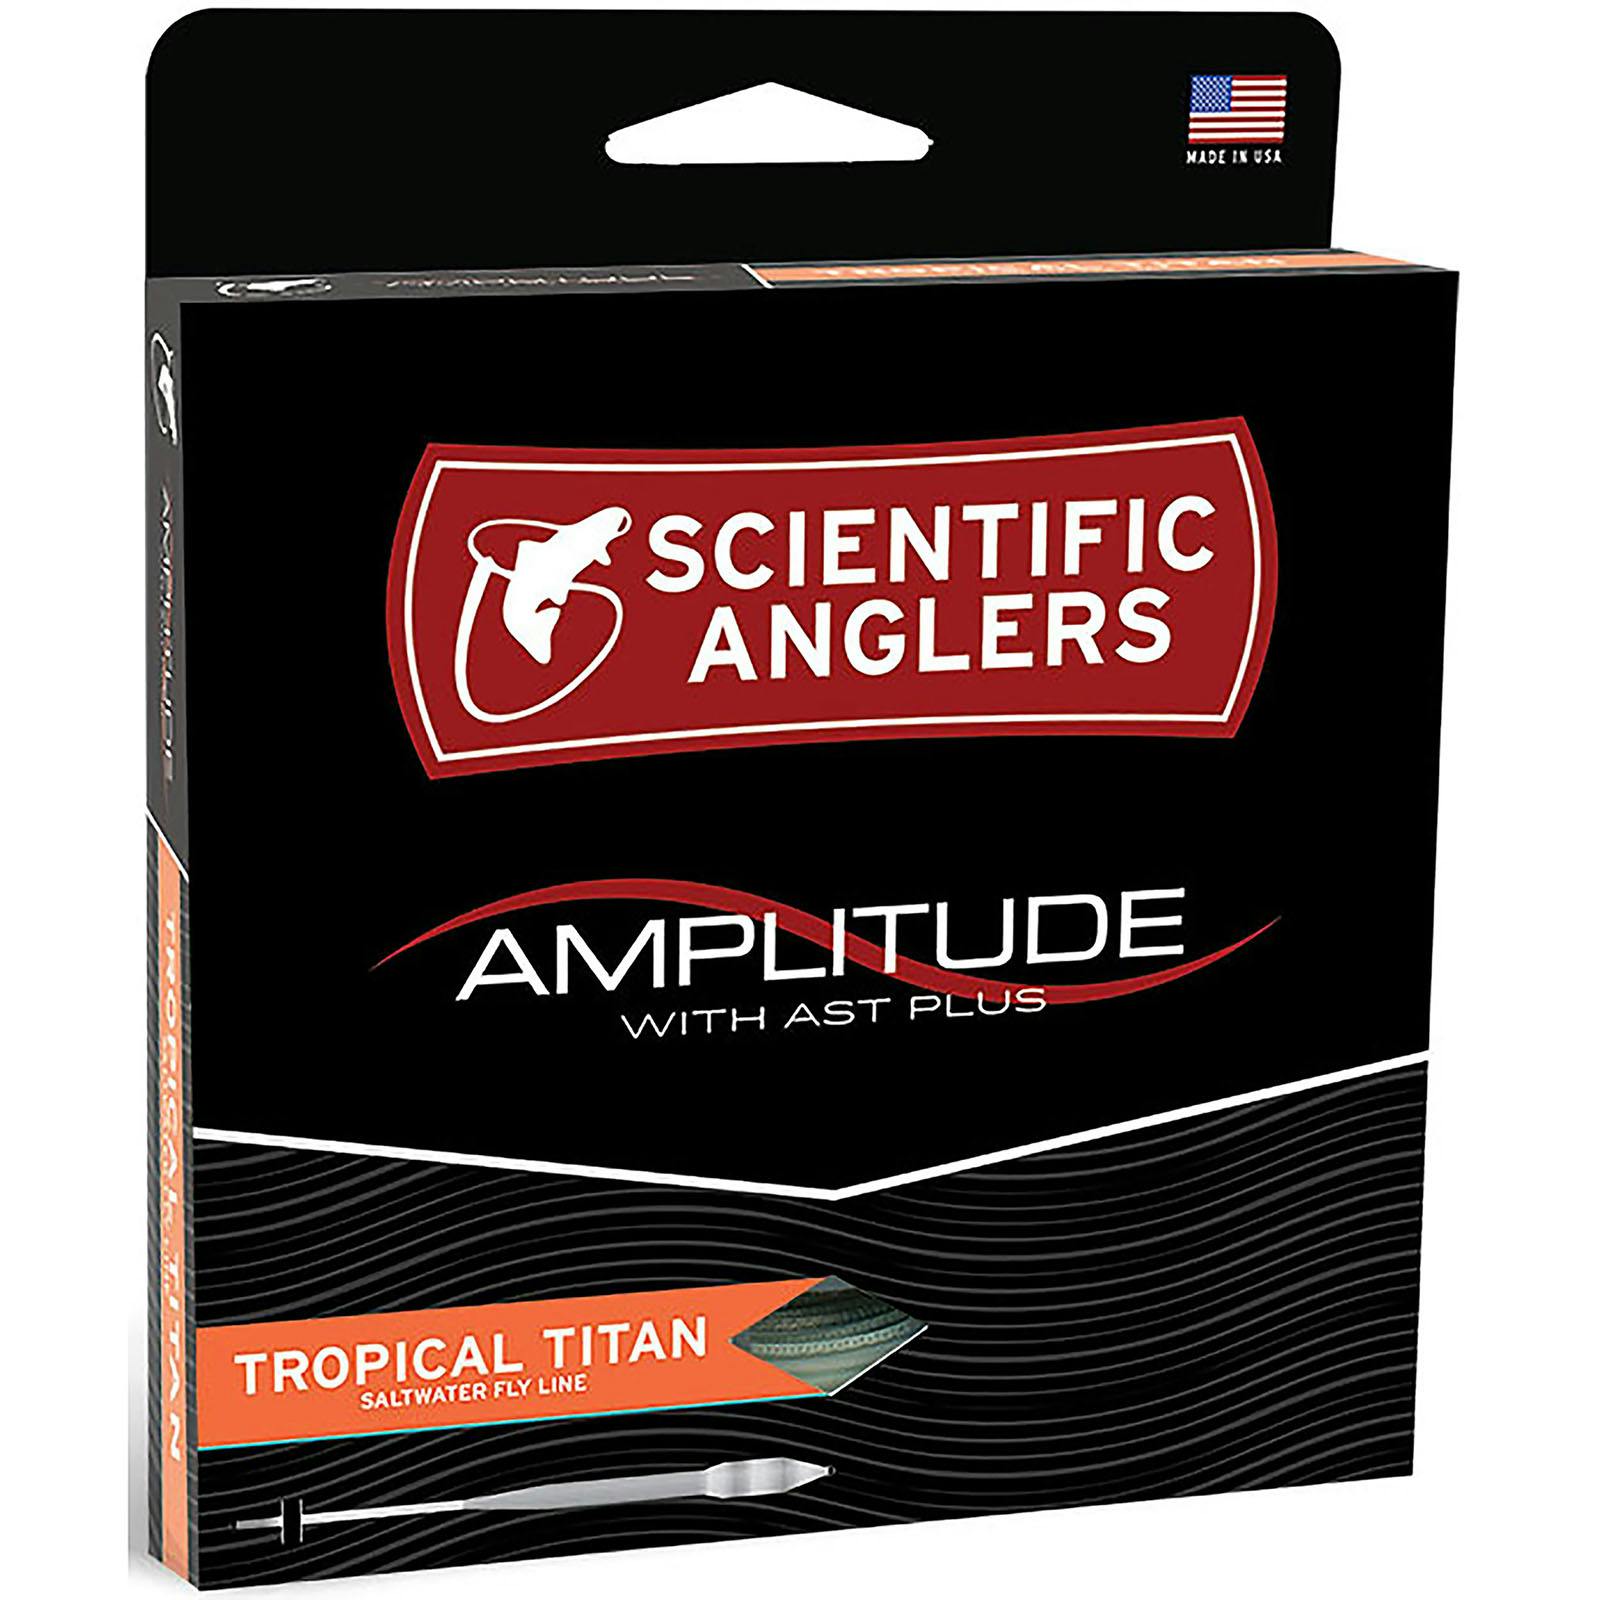 Scientific Anglers Amplitude Smooth Titan Long Freshwater Fly Line